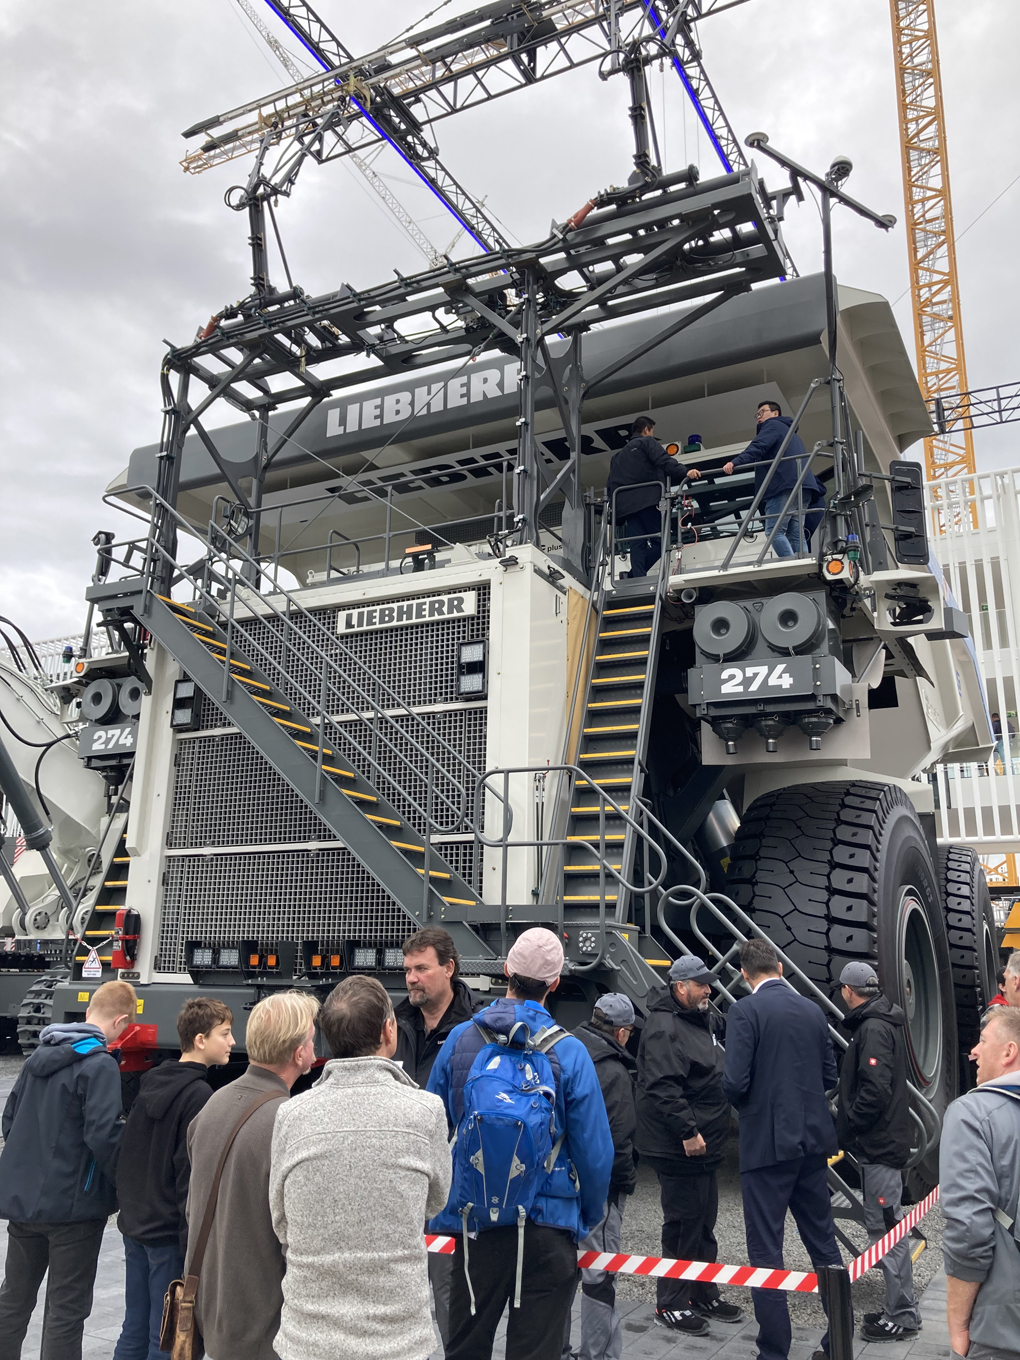 We see the front of a giant mining truch at the Bauma Construction and Mining Trade Fair Munich